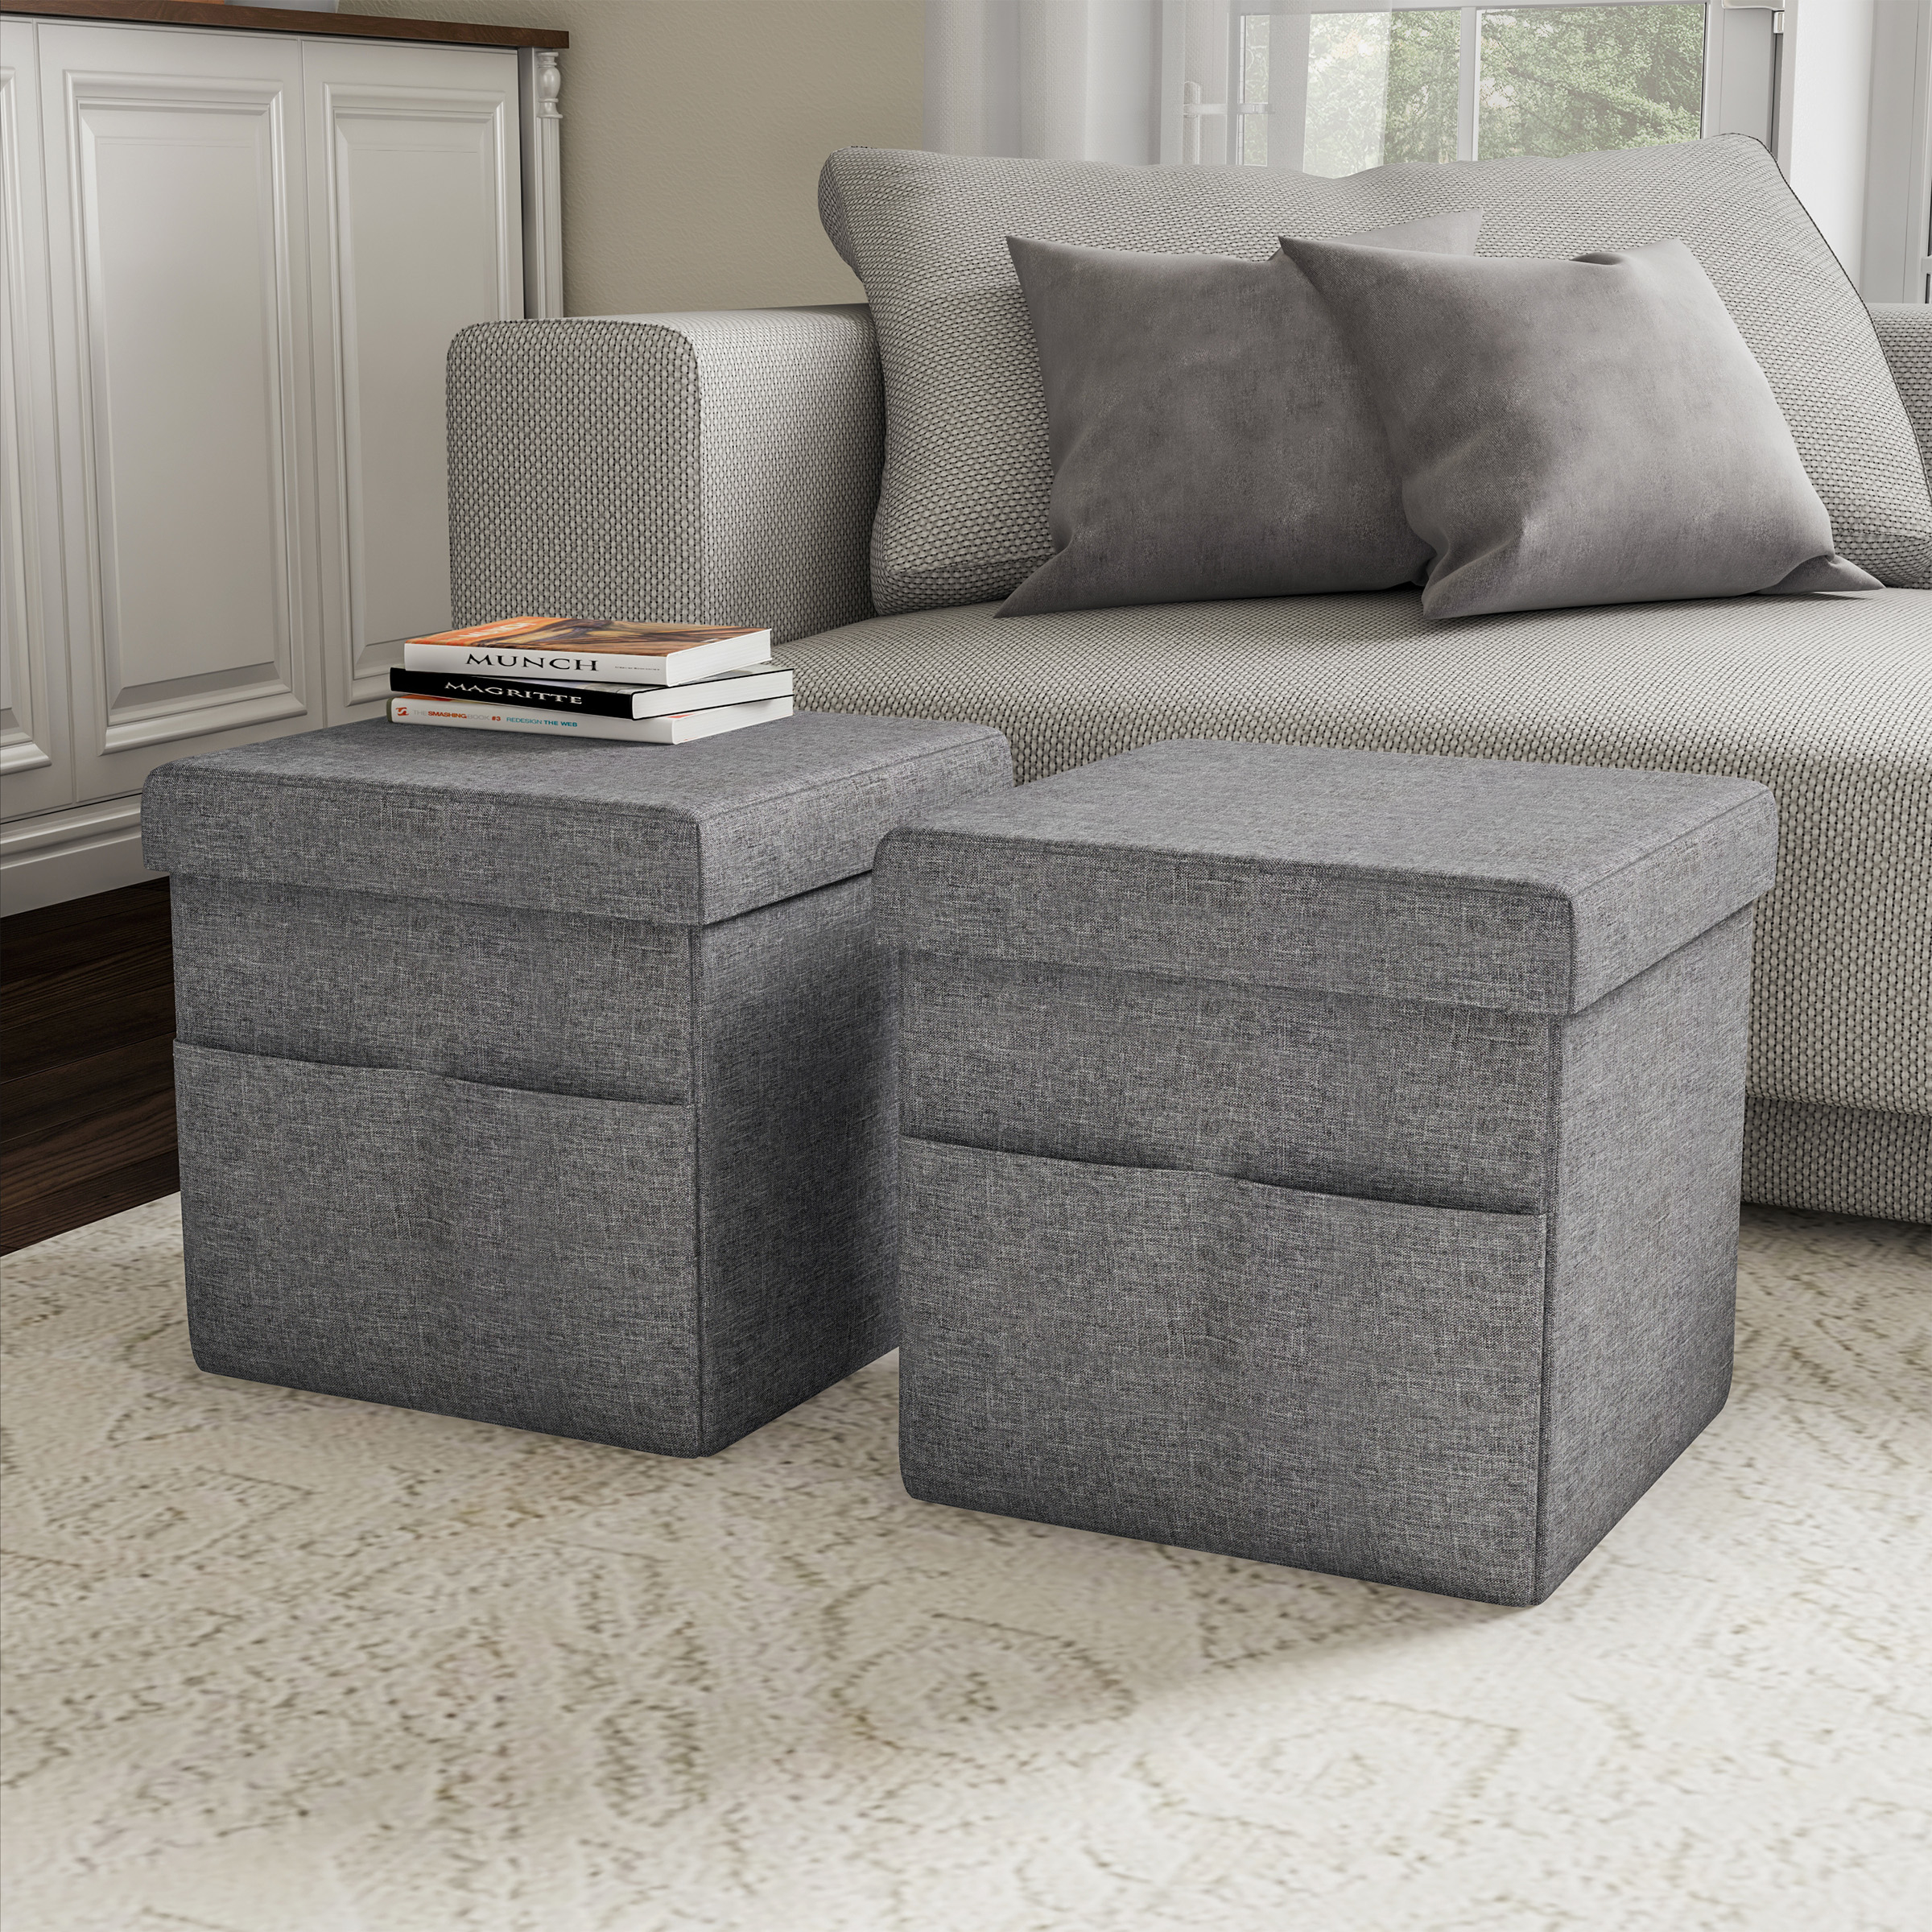 Set Of 2 Foot Stool Storage Ottoman Seats Folding With Lids 15 X 15 In With Pockets